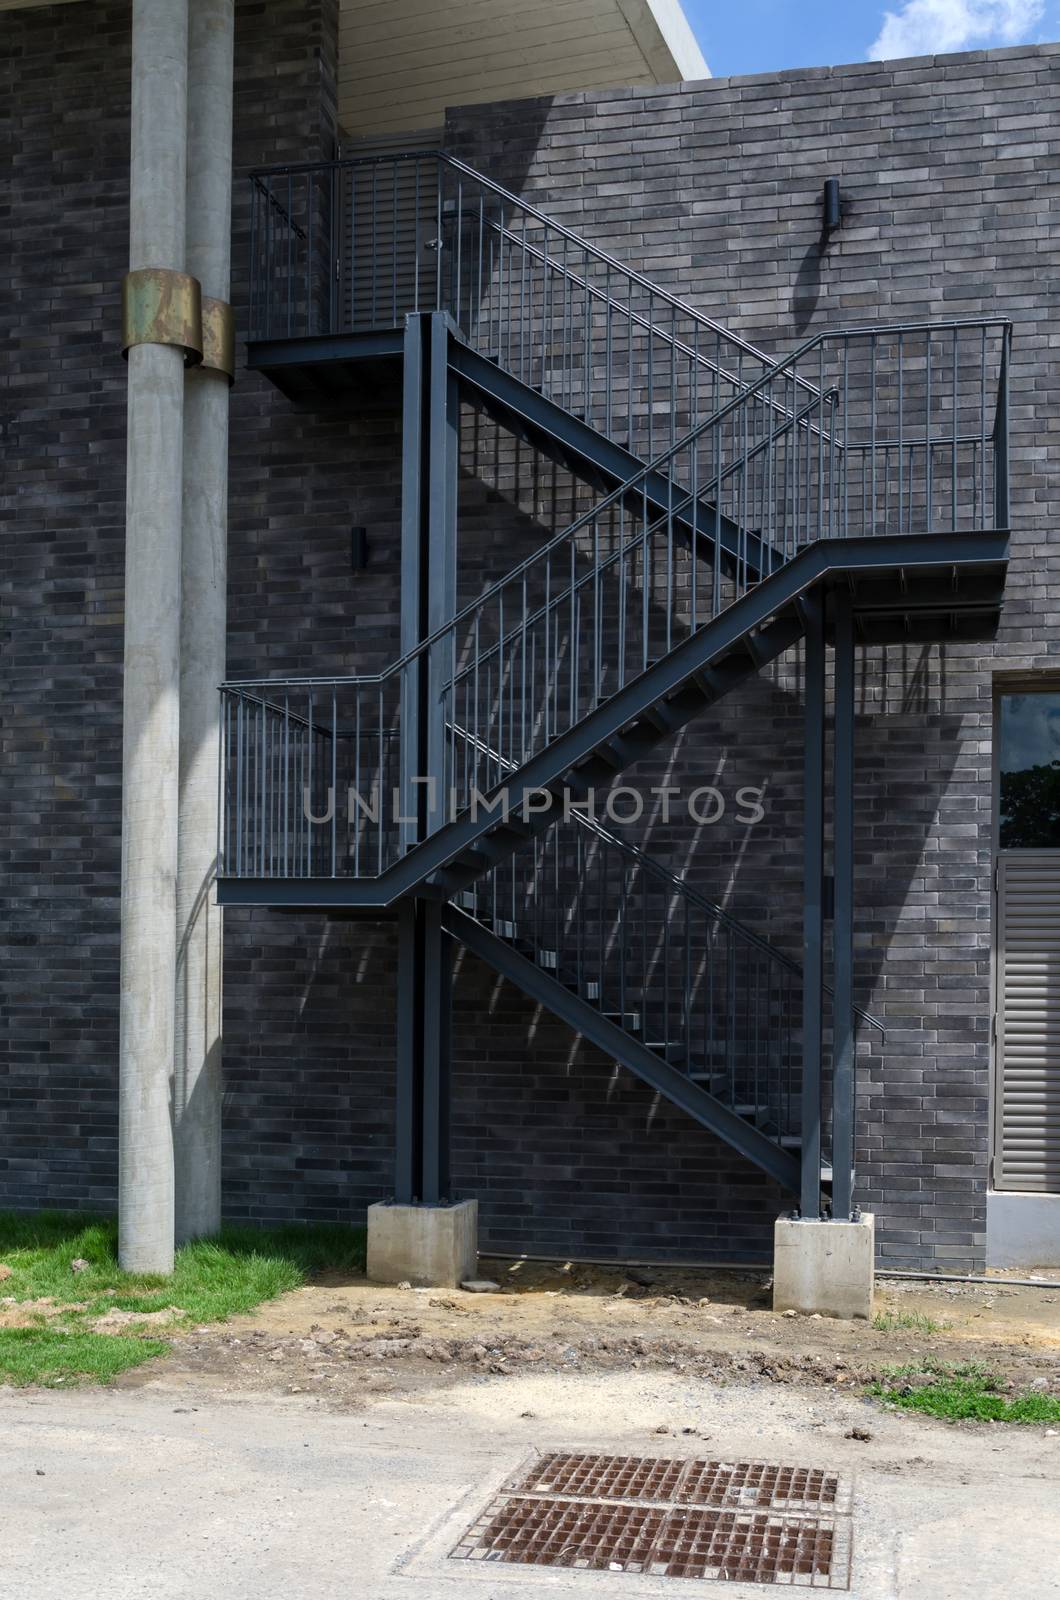 Metal fire escape on the external wall of a building